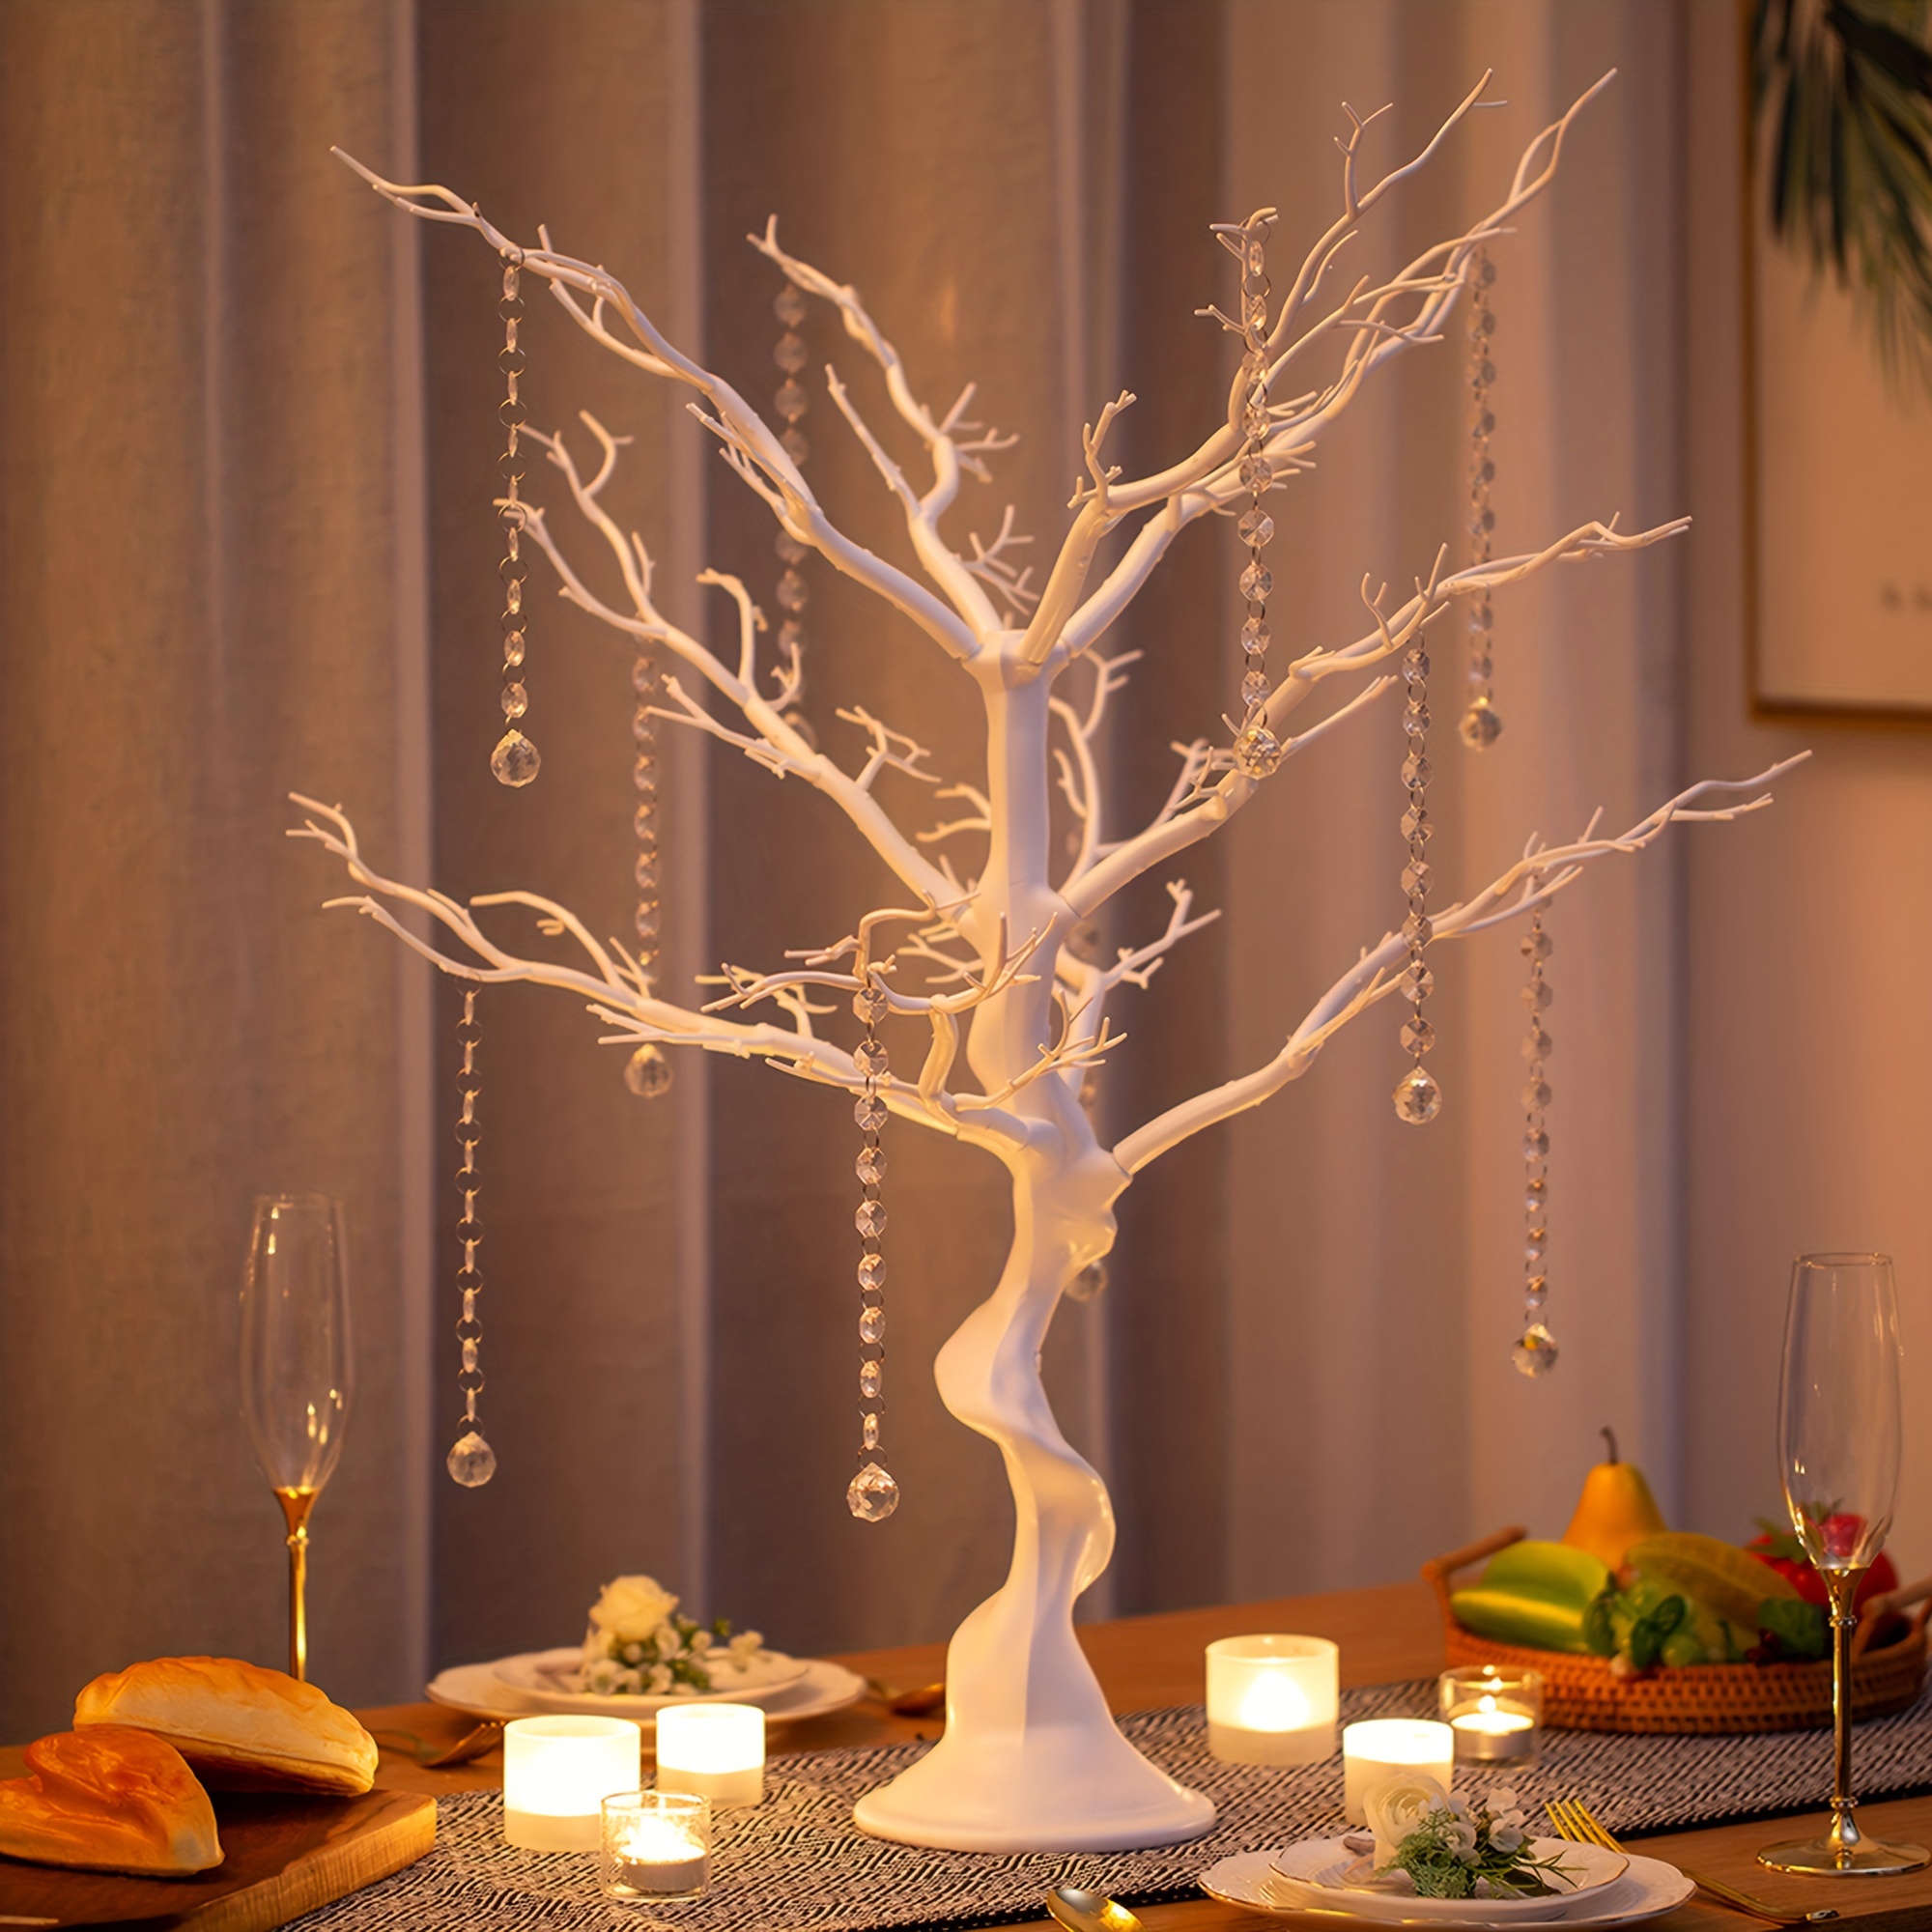 Tree Centerpieces for Weddings 30in - Decorative Ornament Display